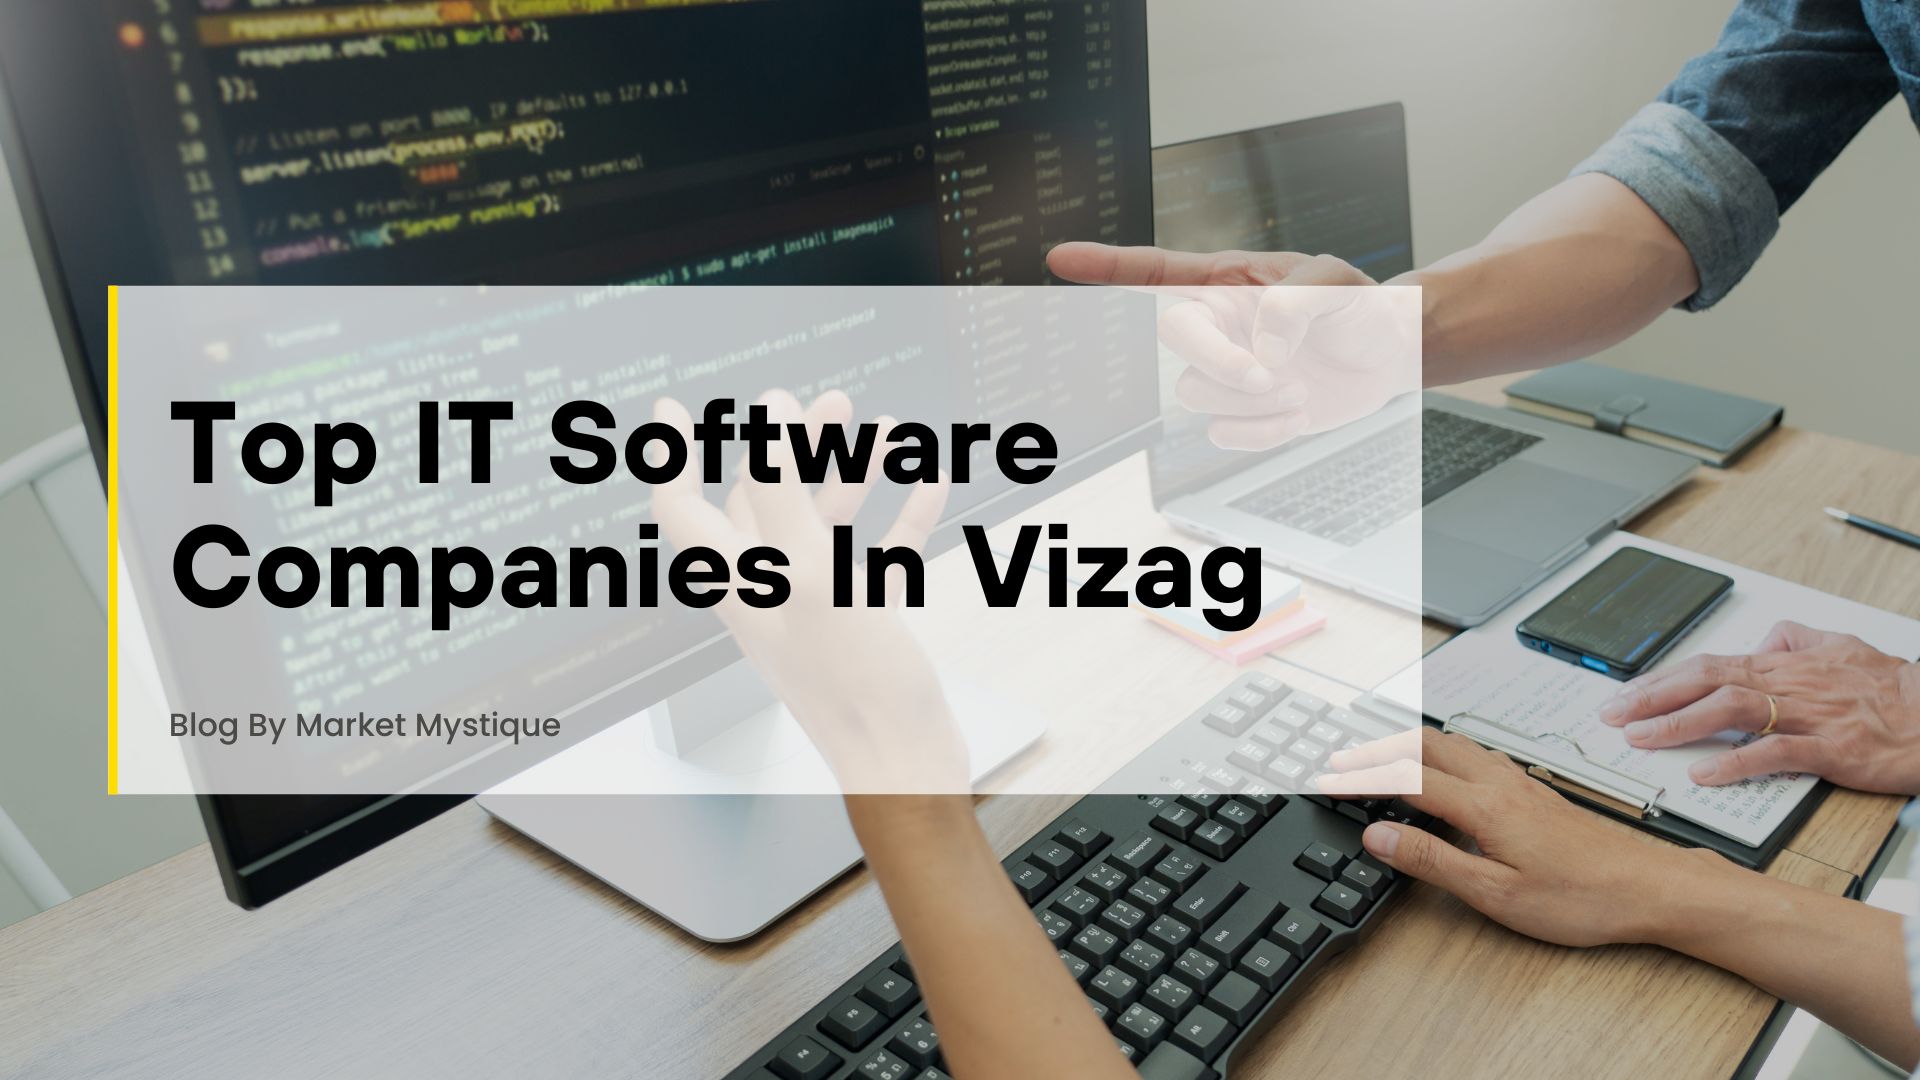 Top IT Software Companies In Vizag